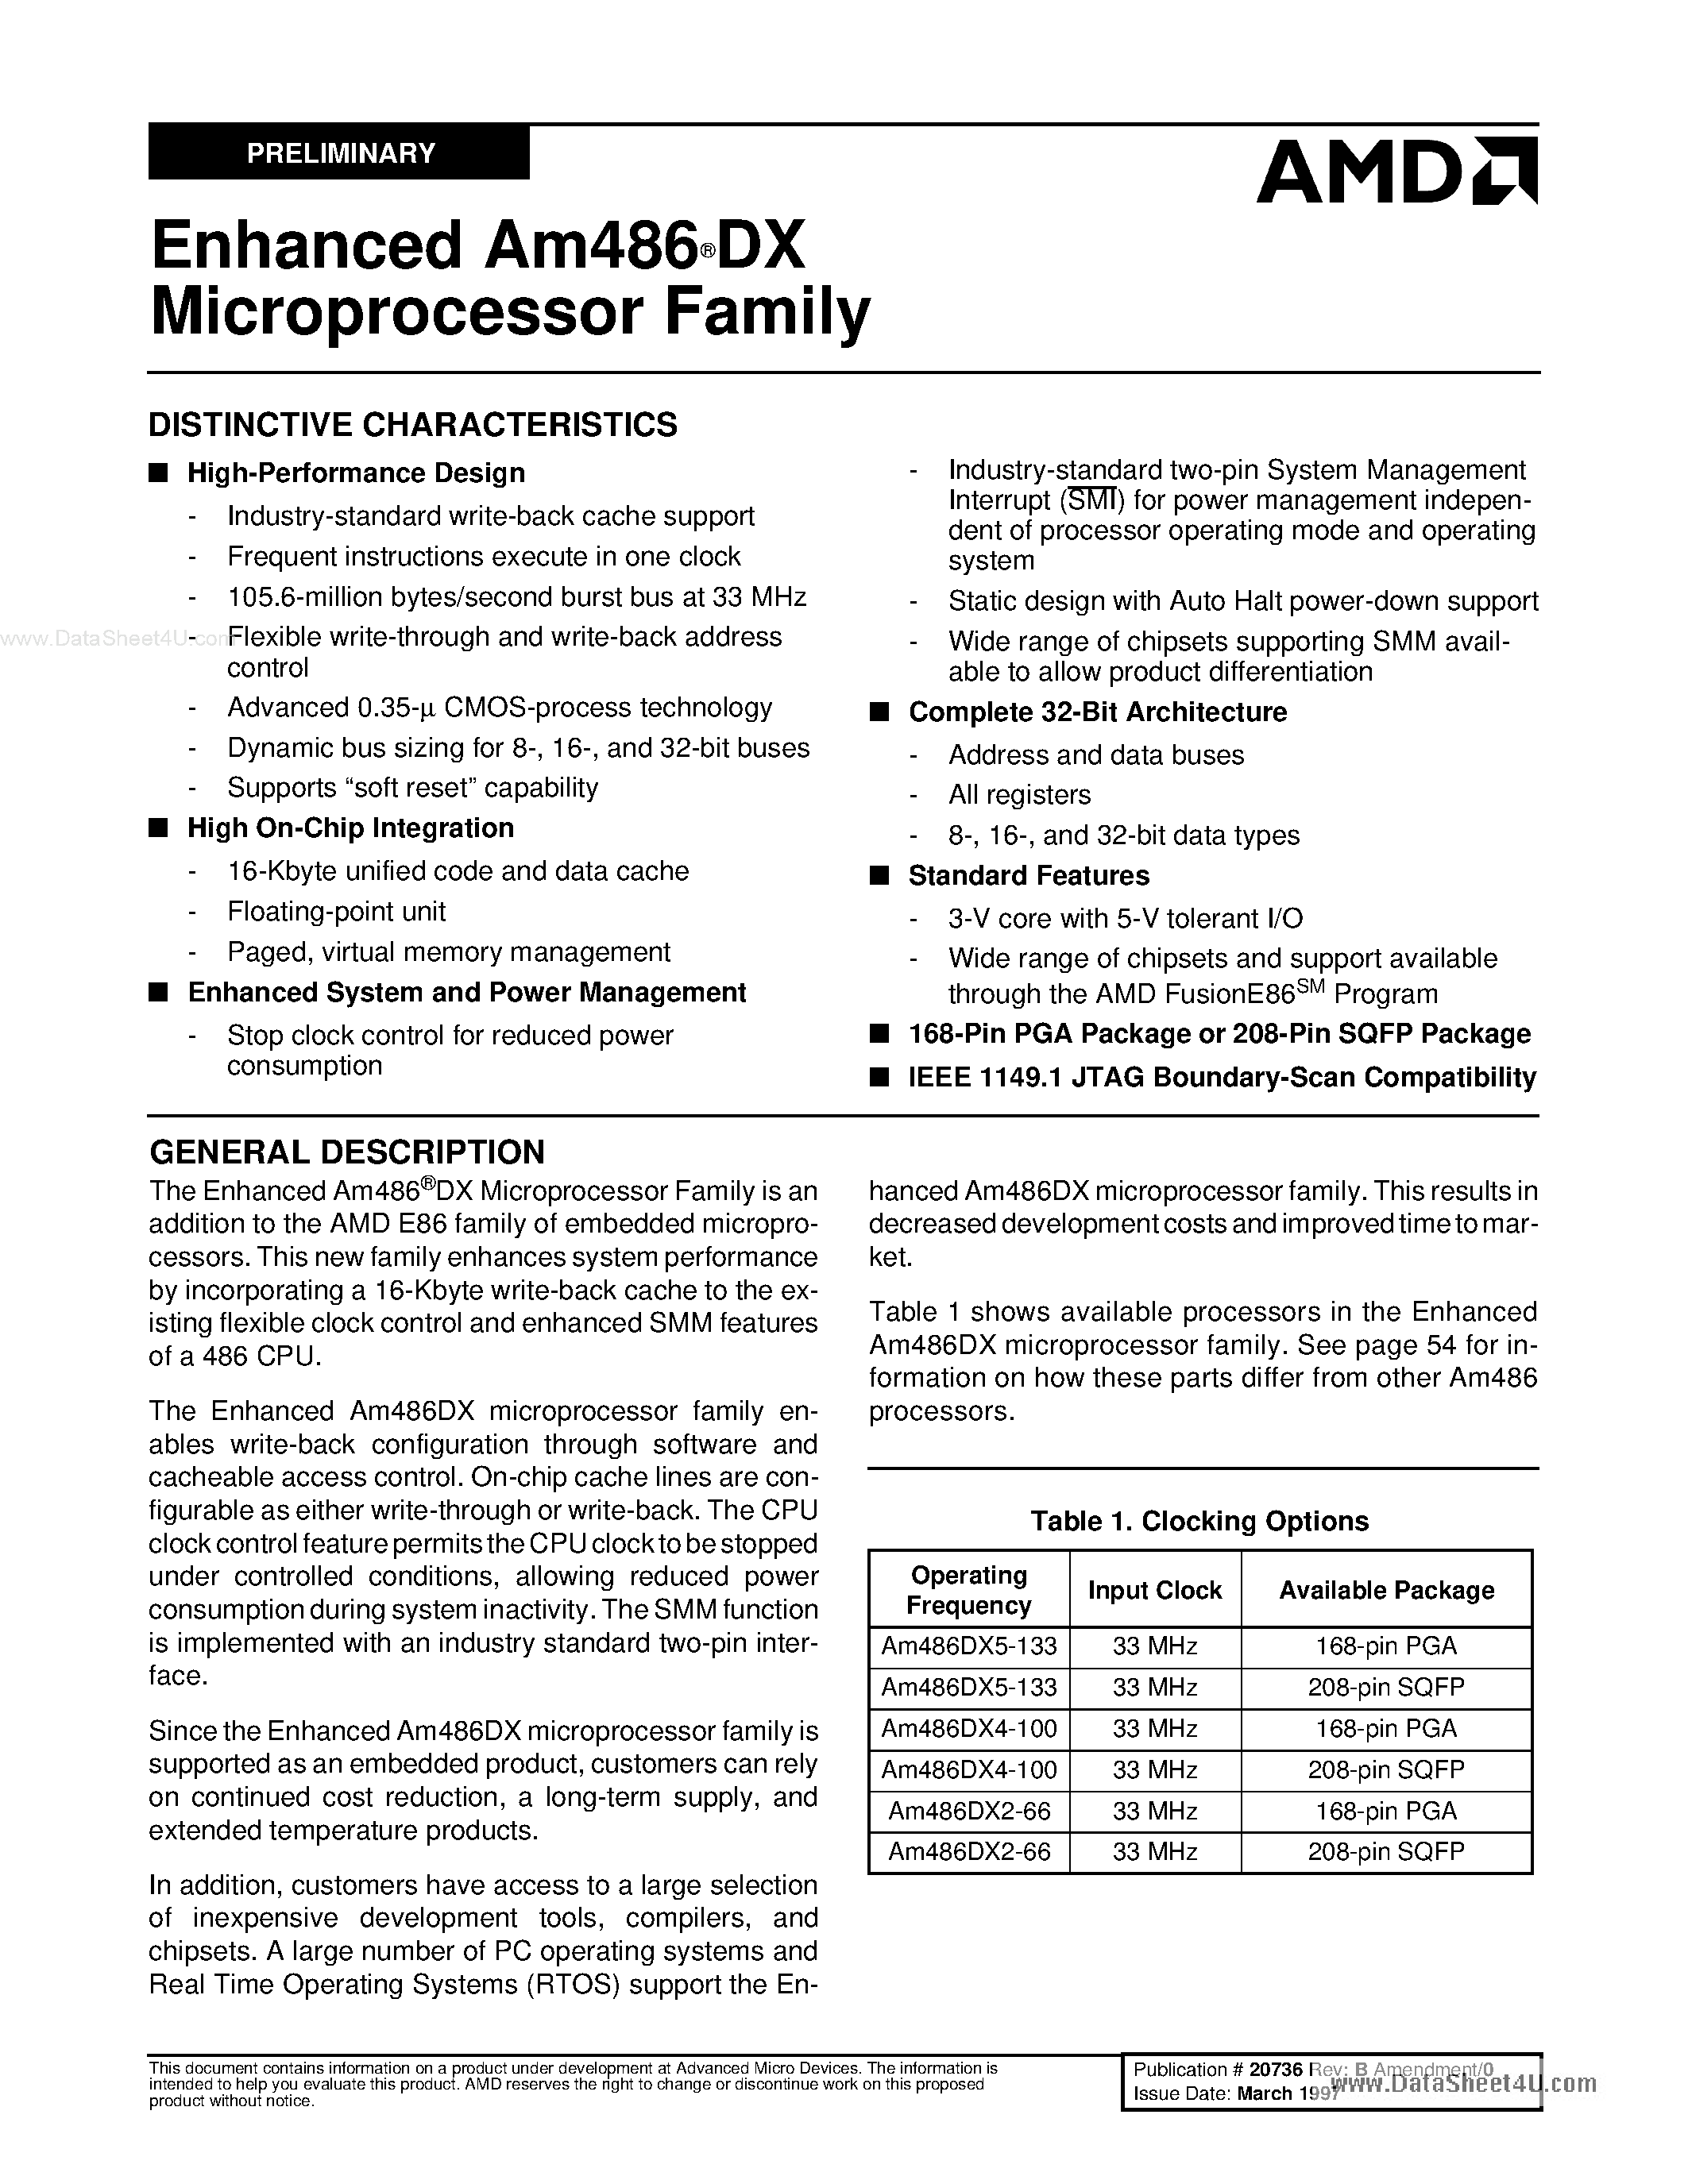 Datasheet AM486DX5 - Microprocessor Family page 1